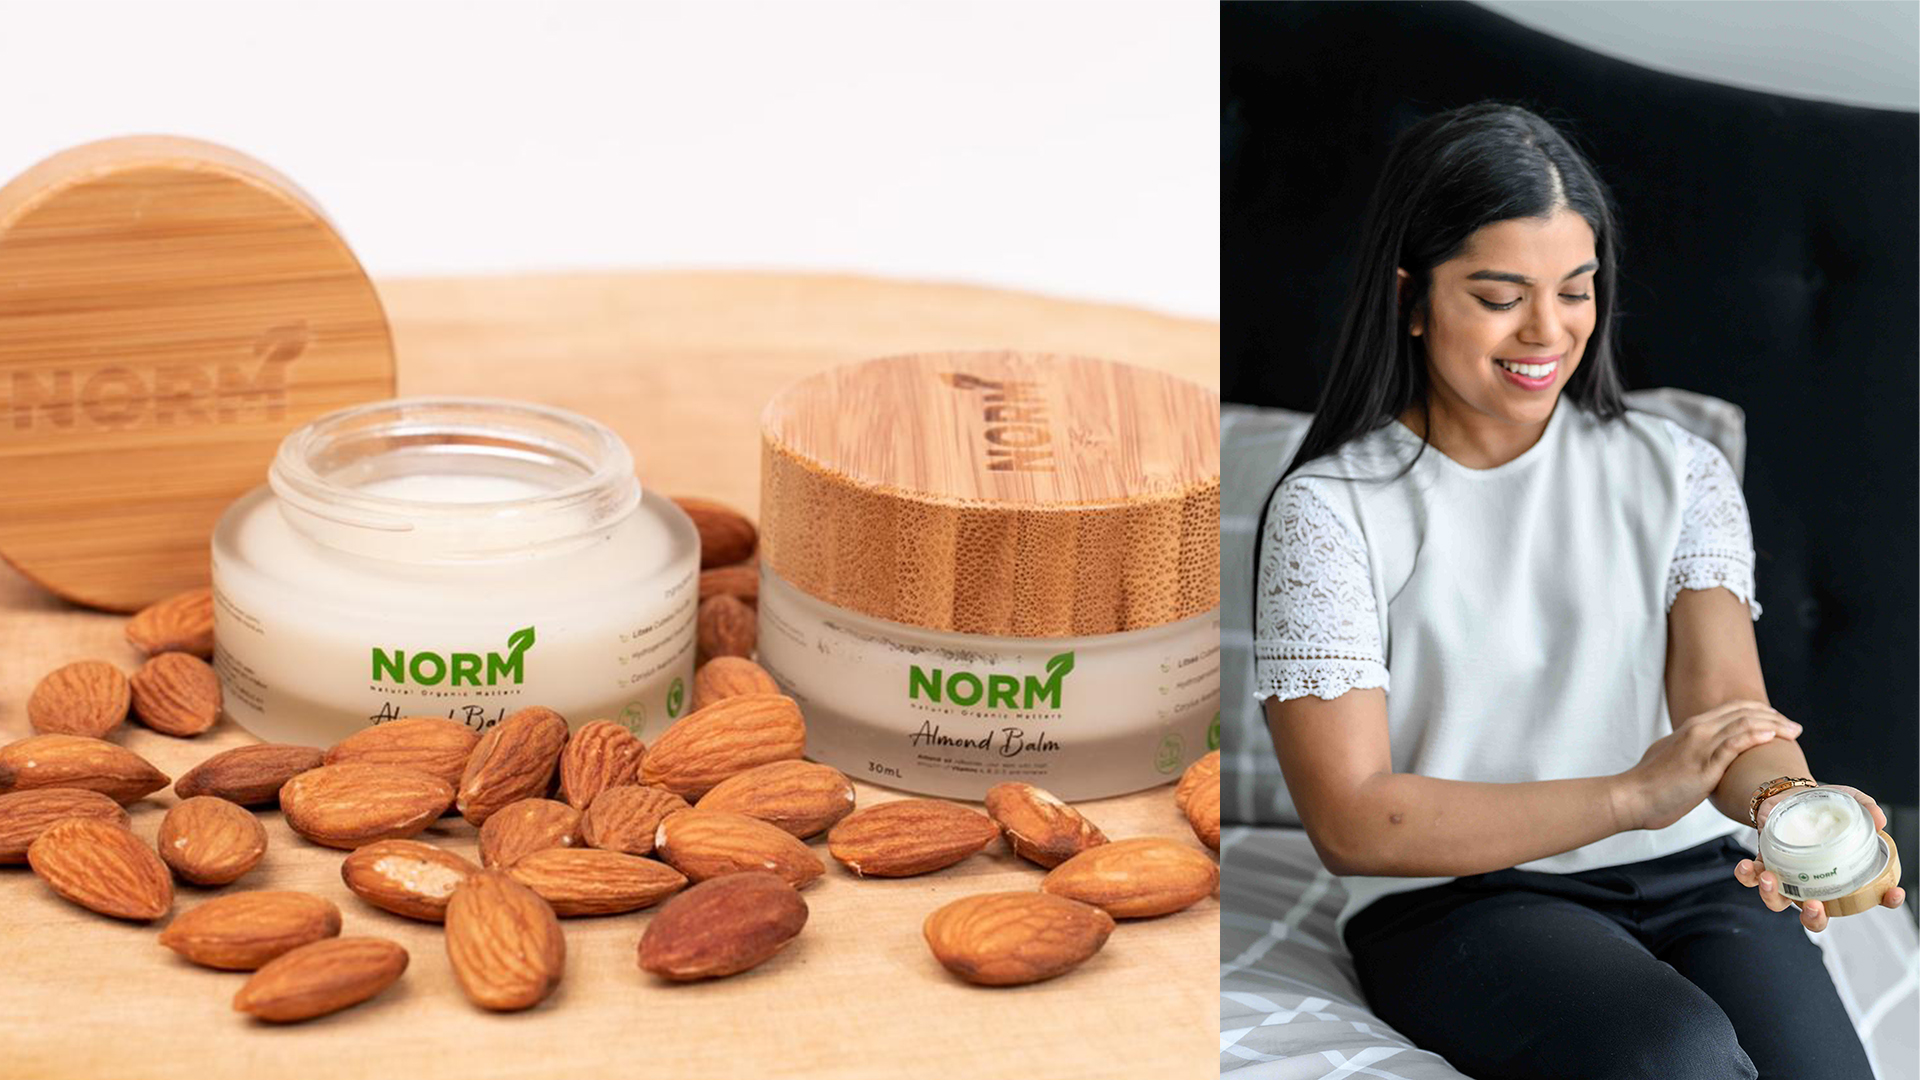 Natural Organic Matters (NORM) organic almond body butter and a person using it for dry skin